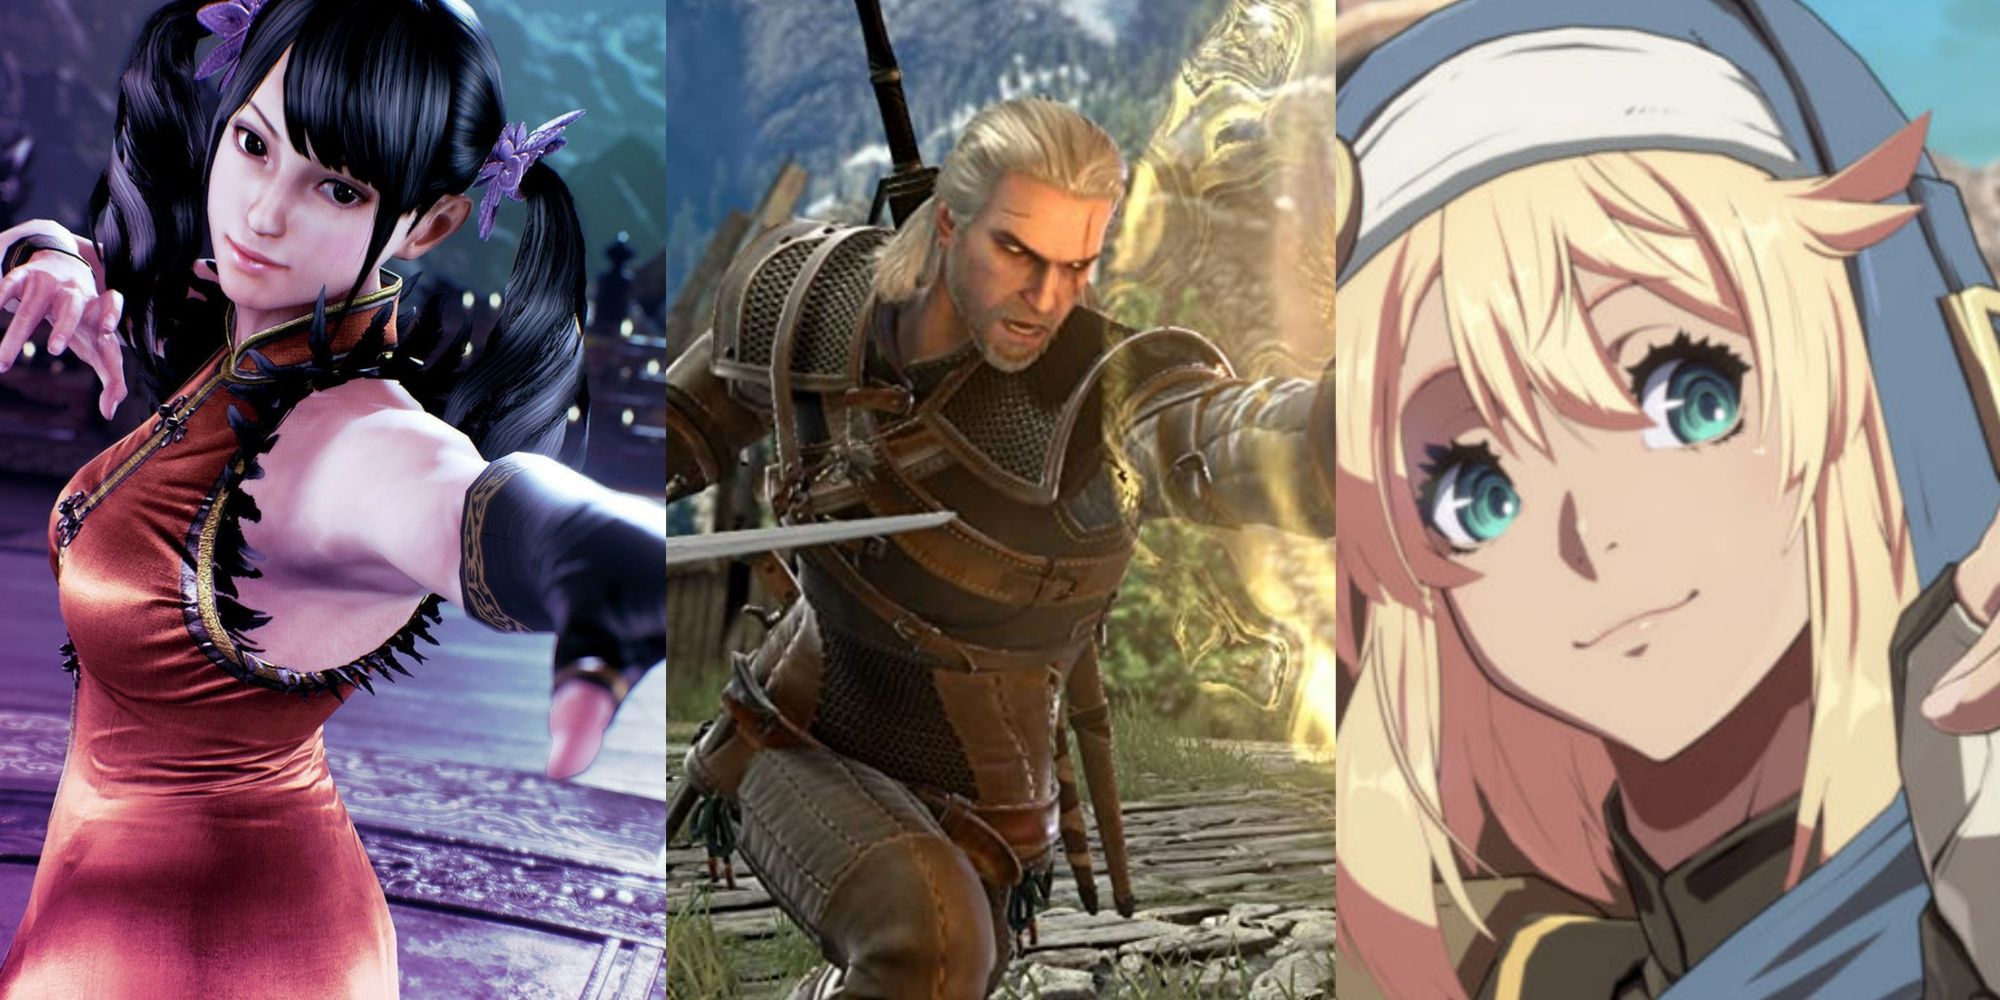 Ling Xiaoyu from Tekken 7, Geralt from The Witcher in Soulcalibur 6, and Bridget from Guilty Gear Strive